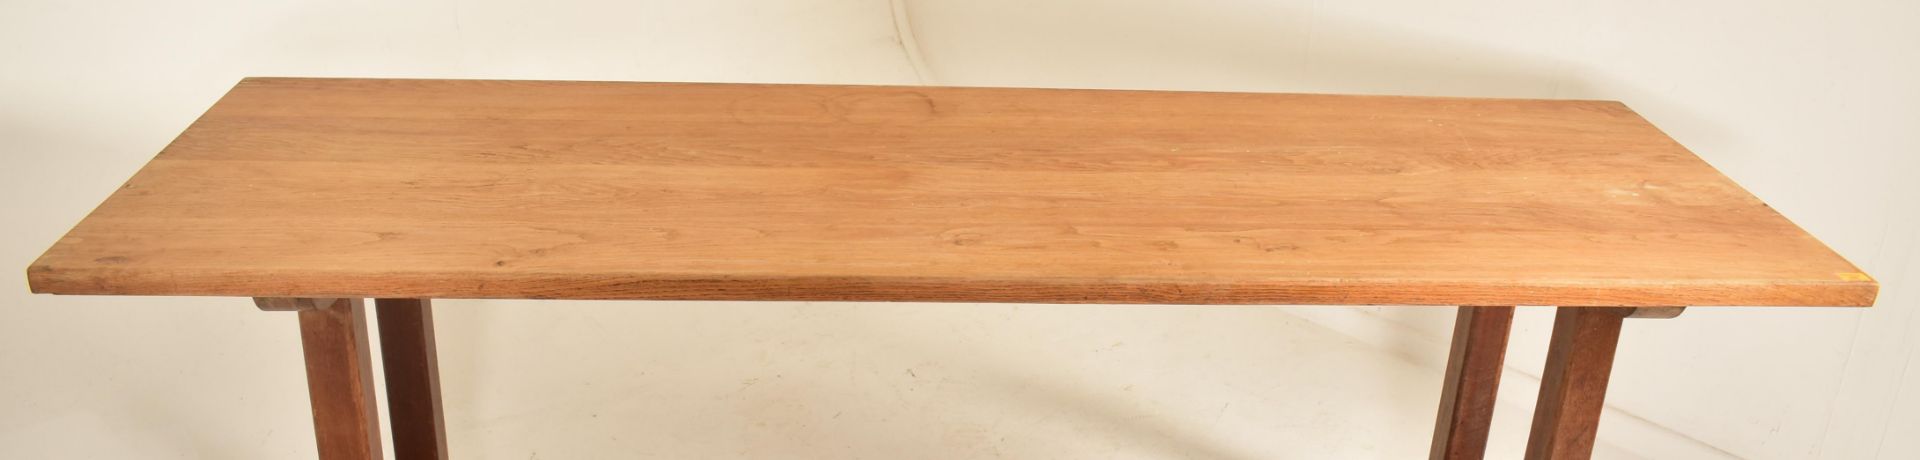 LARGE 20TH CENTURY SOLID ELM REFECTORY DINING TABLE - Image 2 of 5